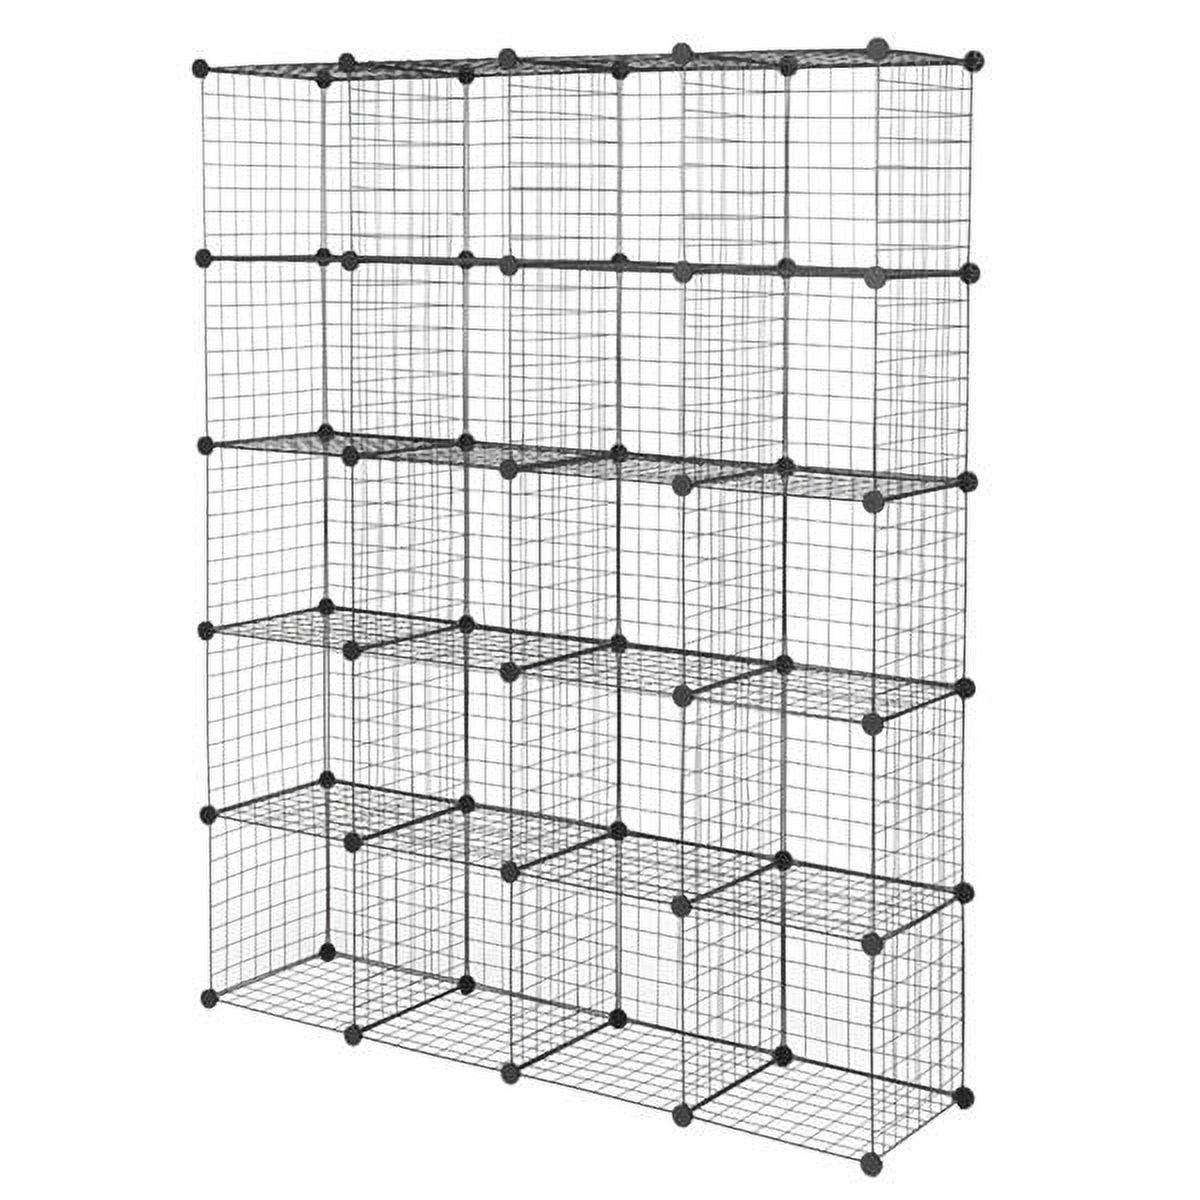 Cube Storage 20-Cube Metal Wire Cube Storage Cubes Shelves Cube Closet Organizer Stackable Storage Bins DIY Storage Grids Modular Wire Cubes Bookshelf Bookcase for Home Office - image 3 of 5